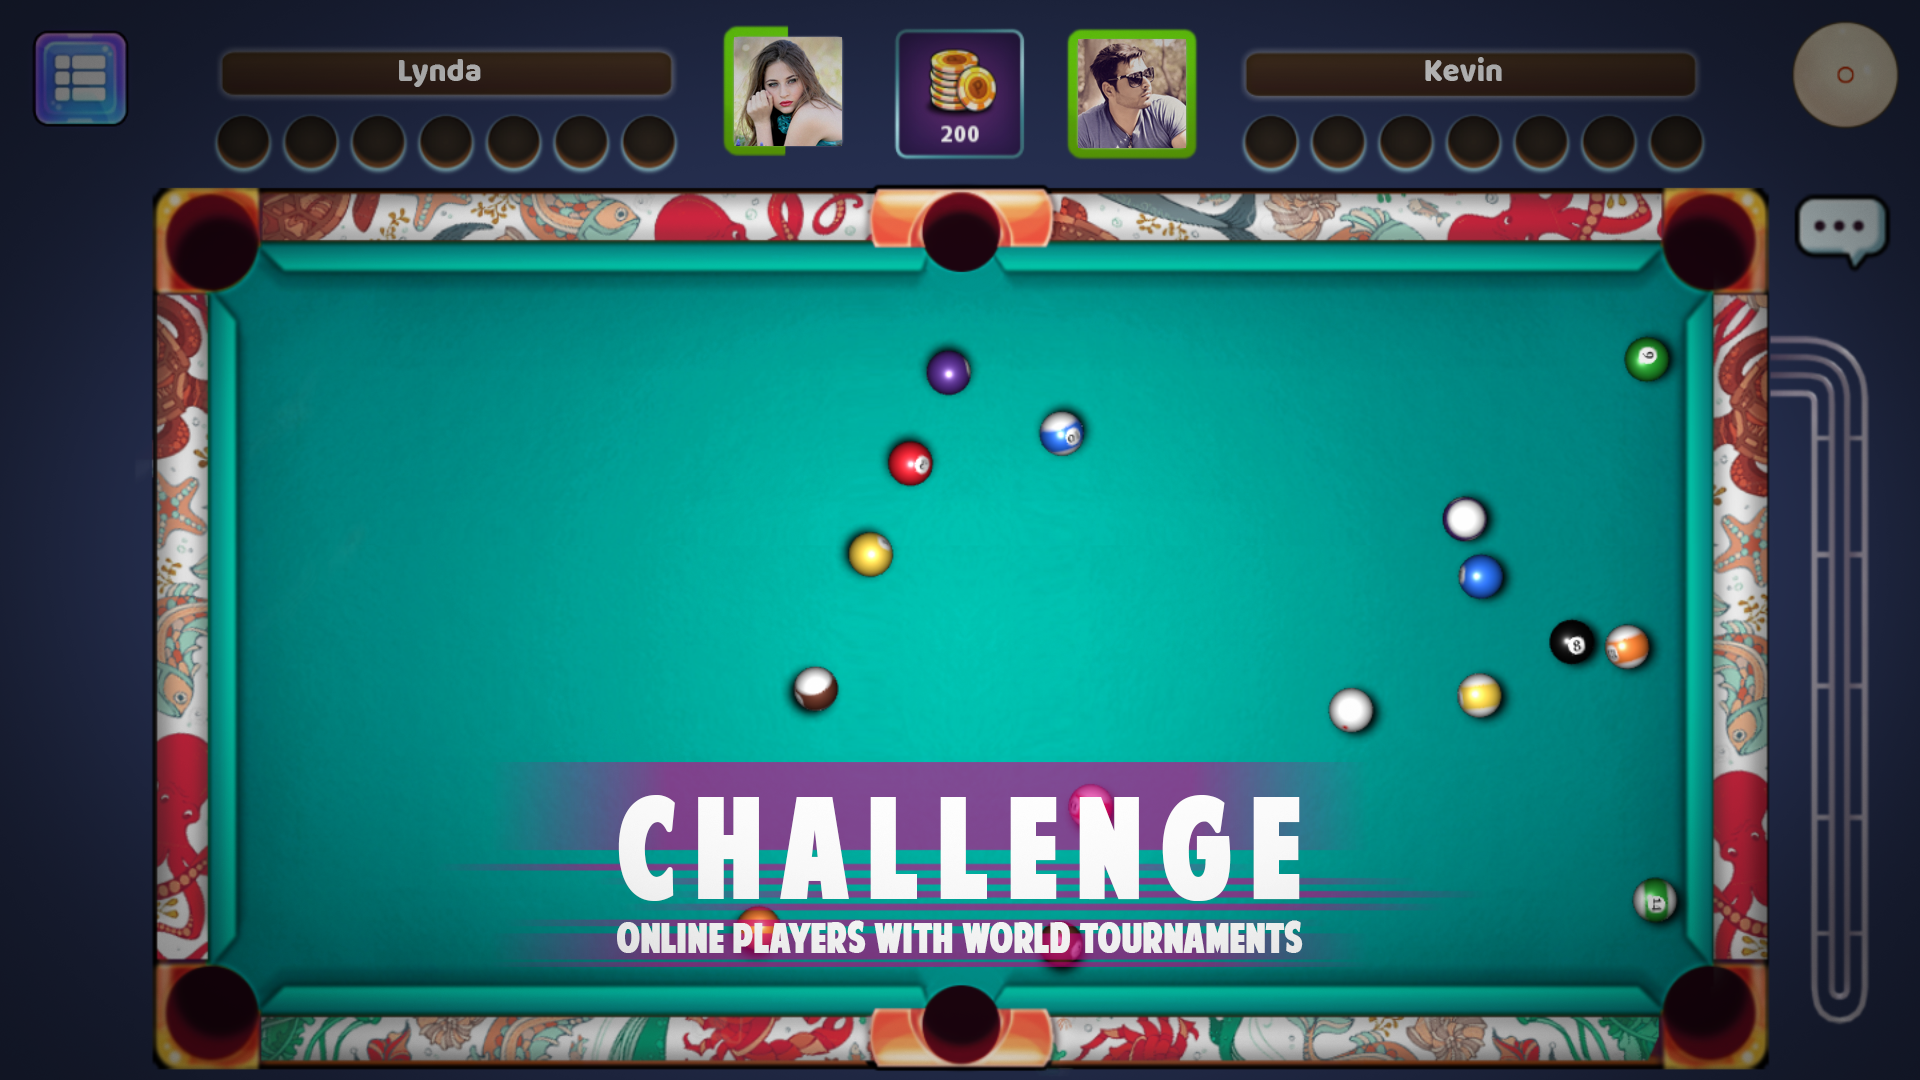 8 Pool World Tour for Android - APK Download - 